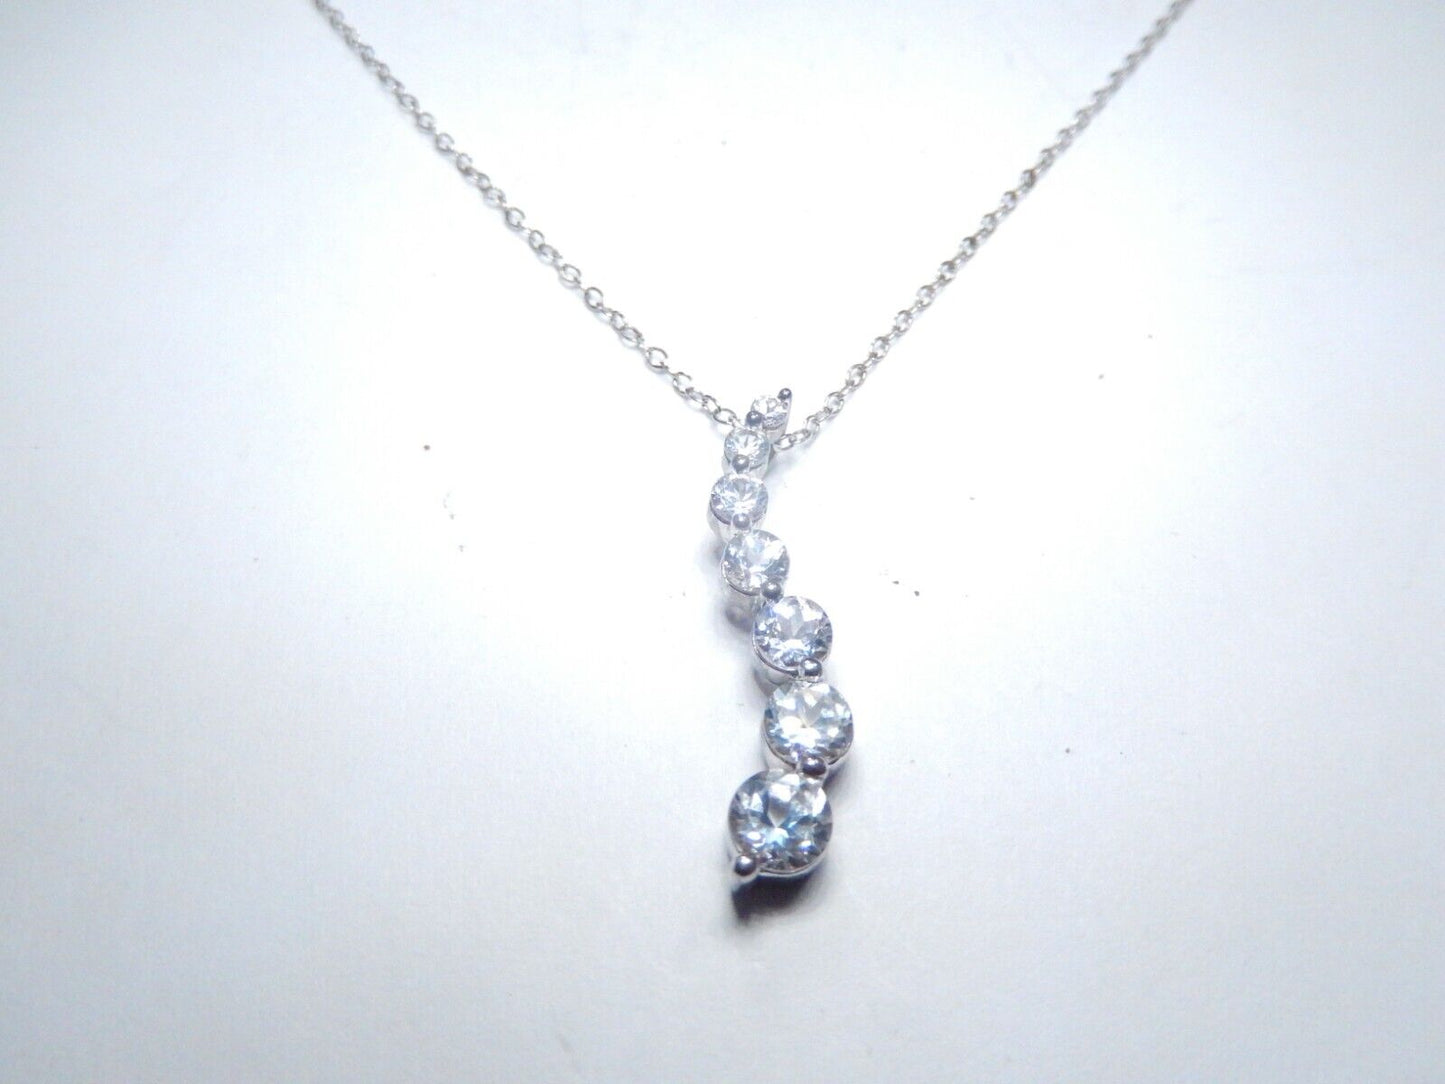 LARGE Sterling Silver CZ Journey Pendant Necklace 1-1/8" Tall w/18" Chain